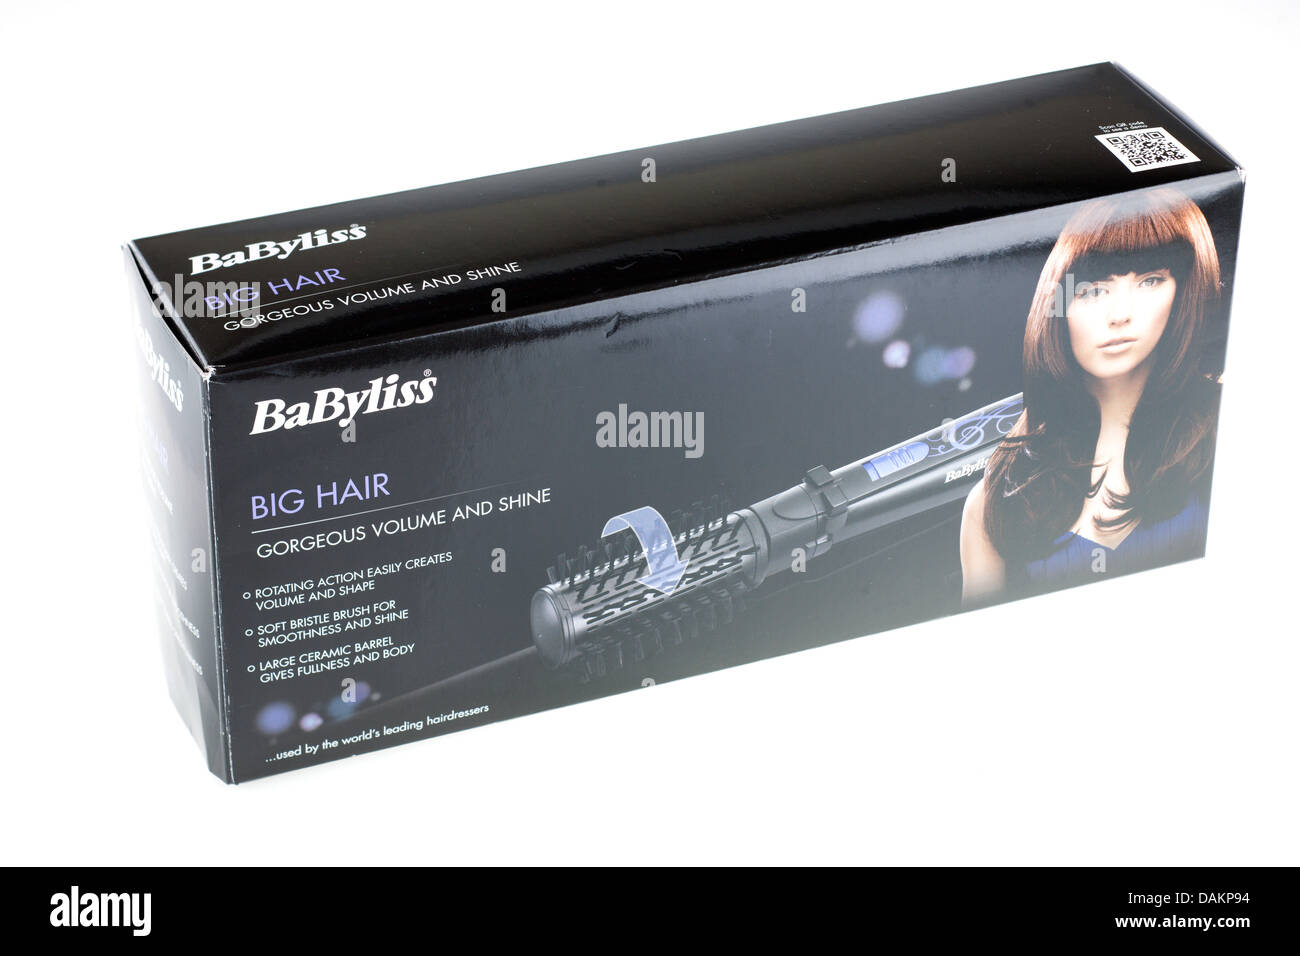 Boxed Babyliss Big Hair hair curler and dryer Stock Photo